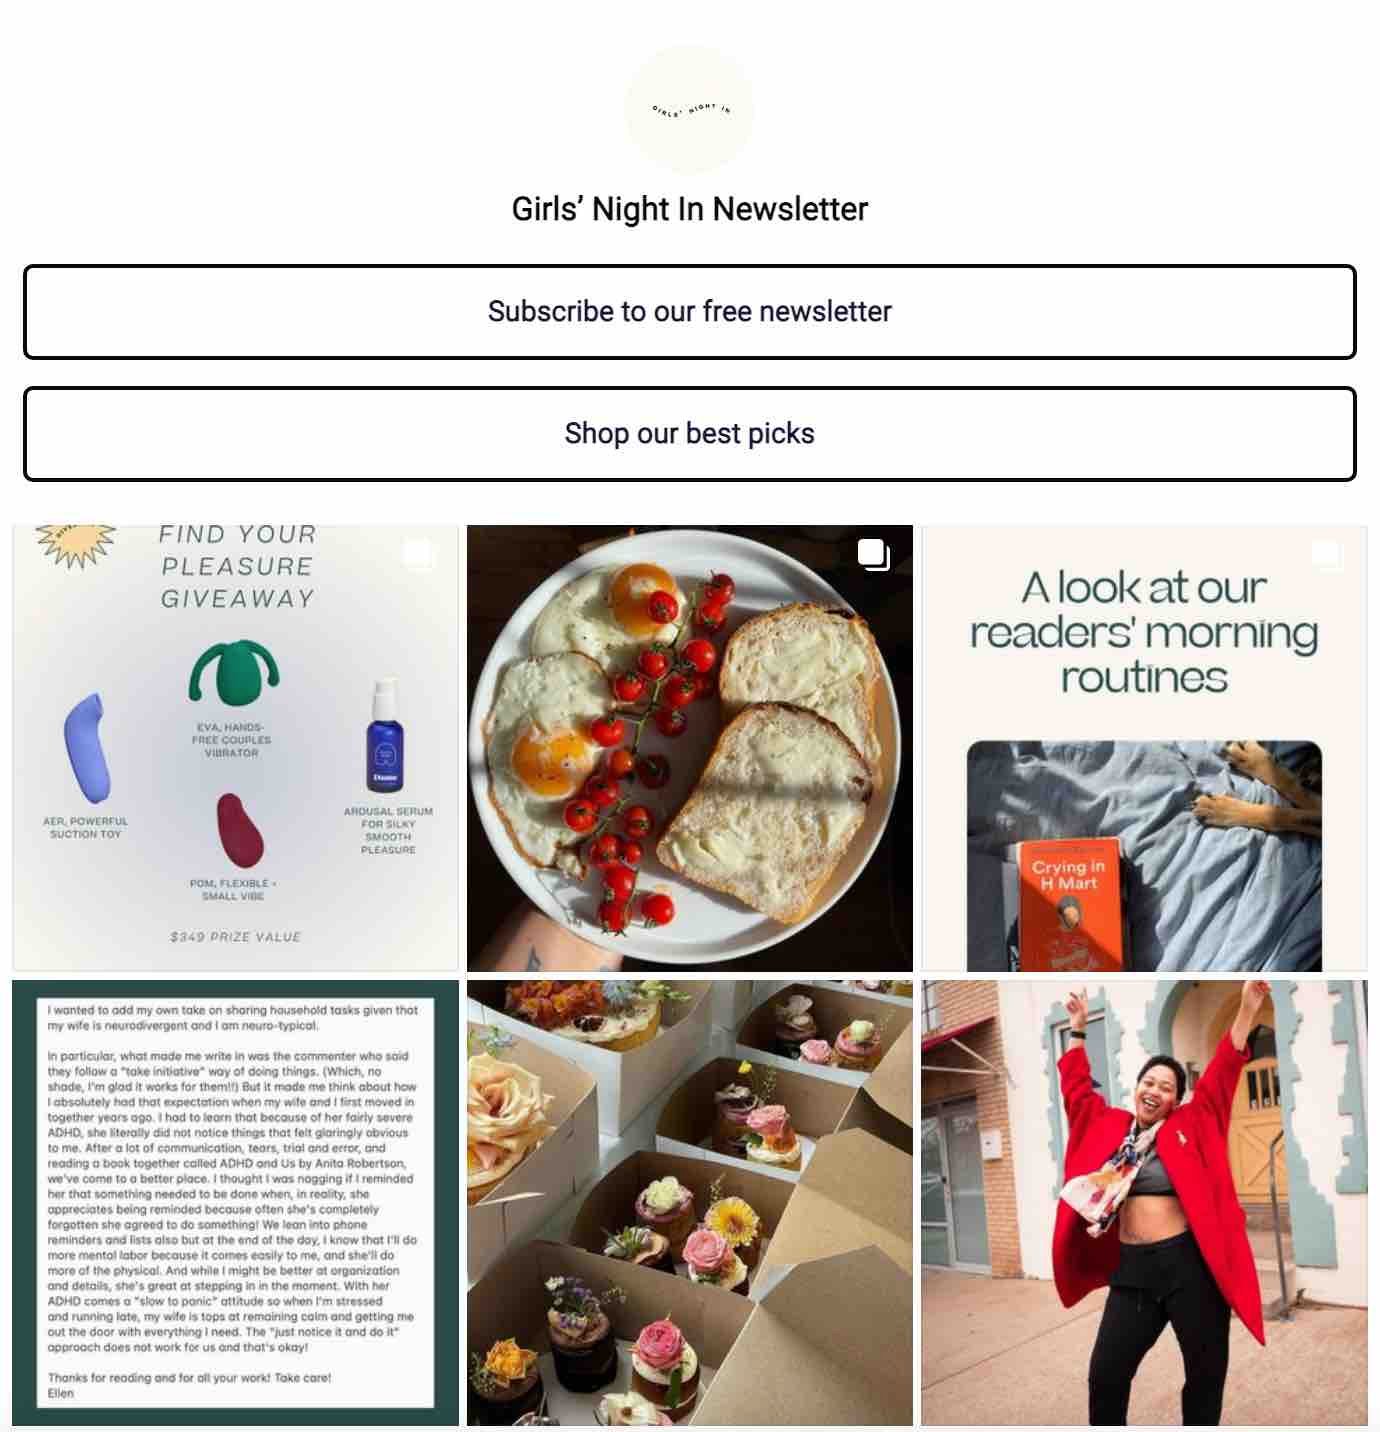 instagram marketing for small business, the link section from Girls’ Night In Club’s Instagram profile directs followers to several links in one place.